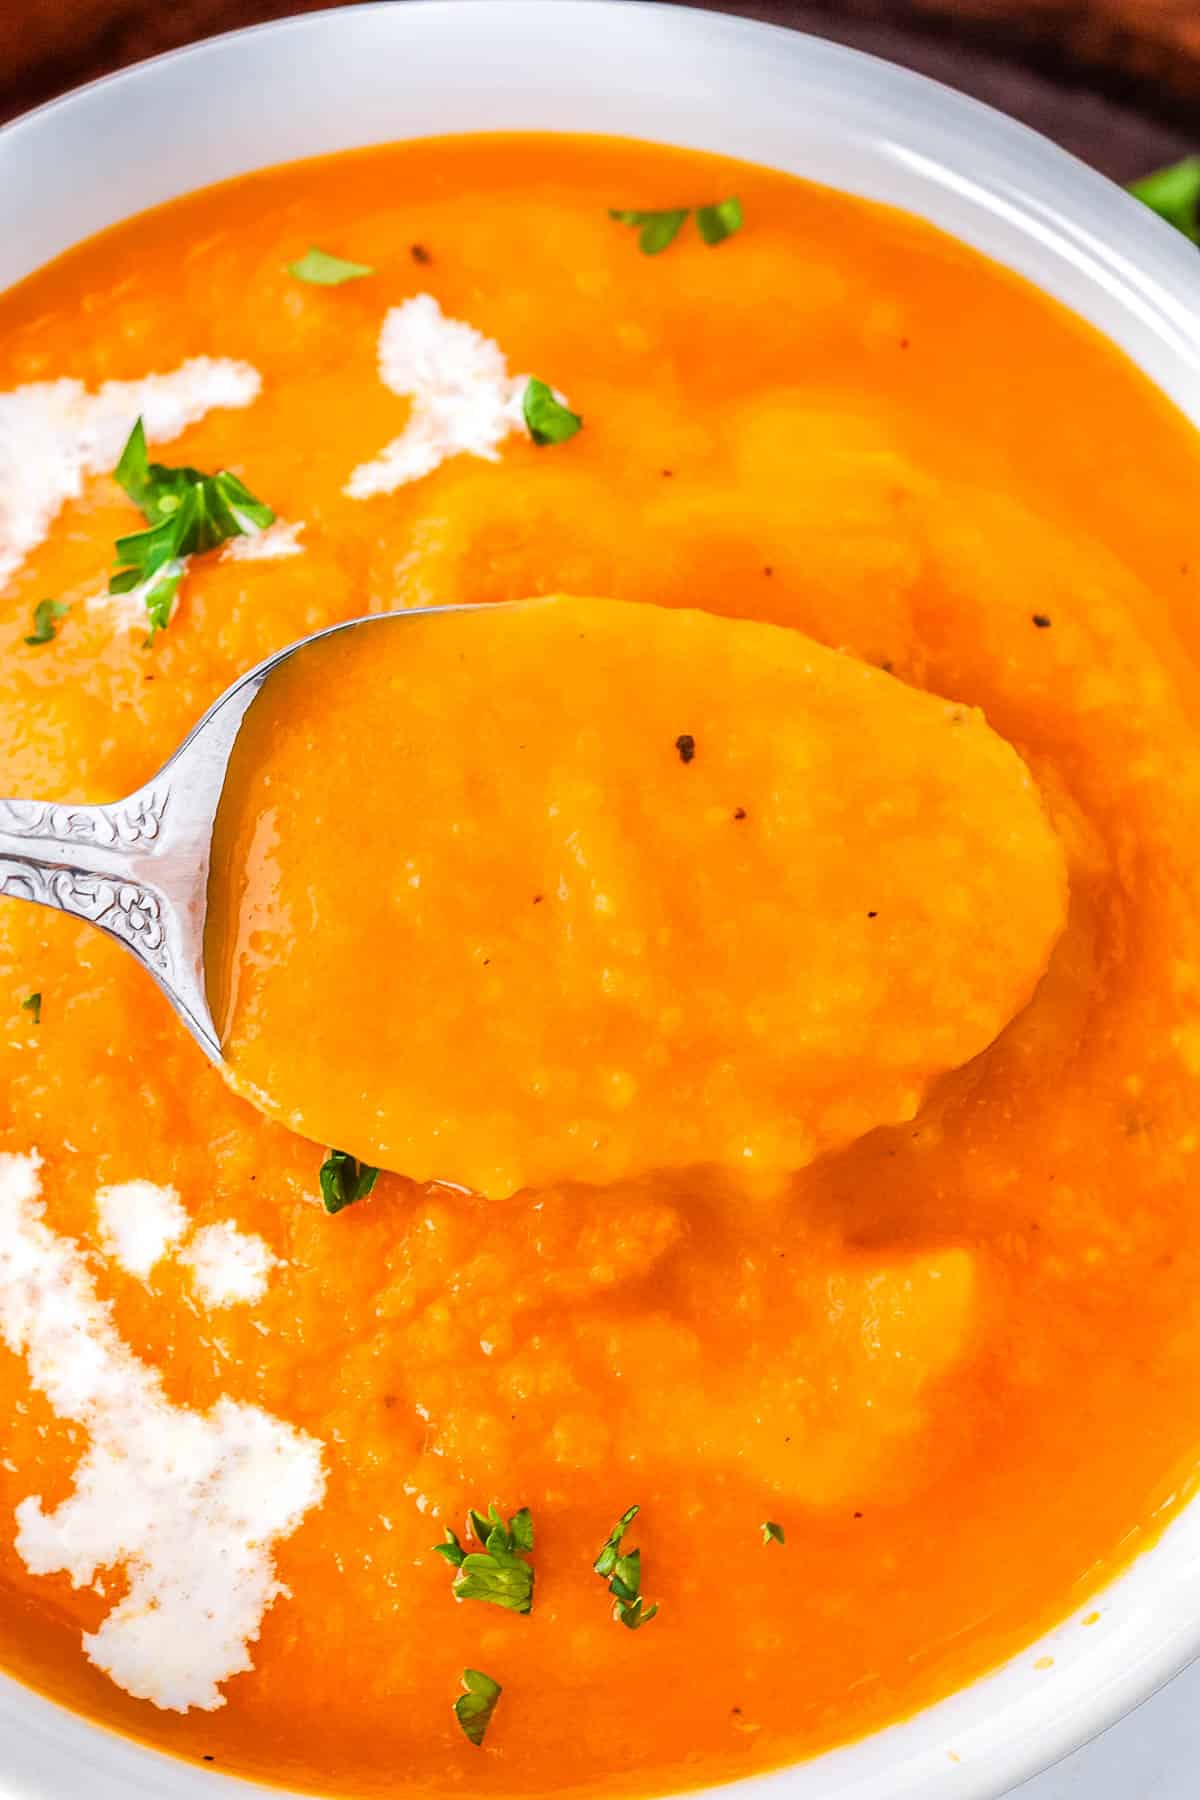 A spoon in a big bowl of carrot and tomato soup.